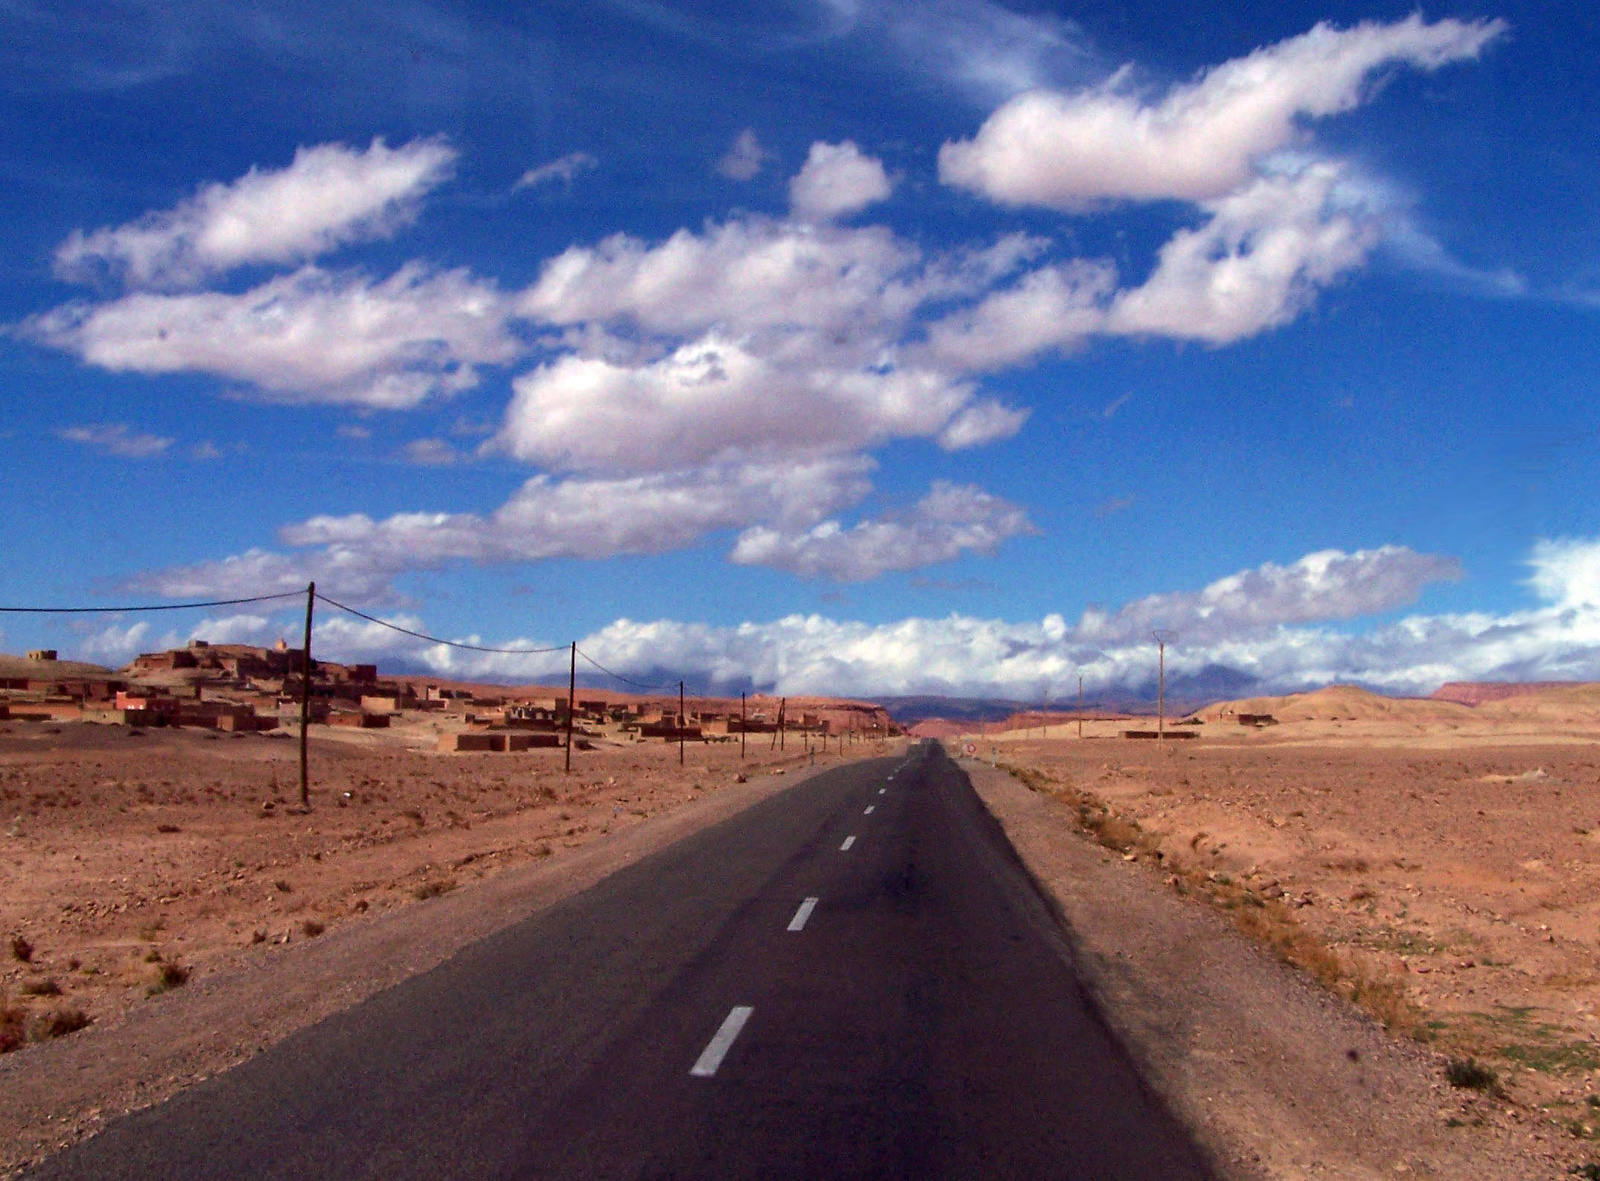 On the road in Morocco